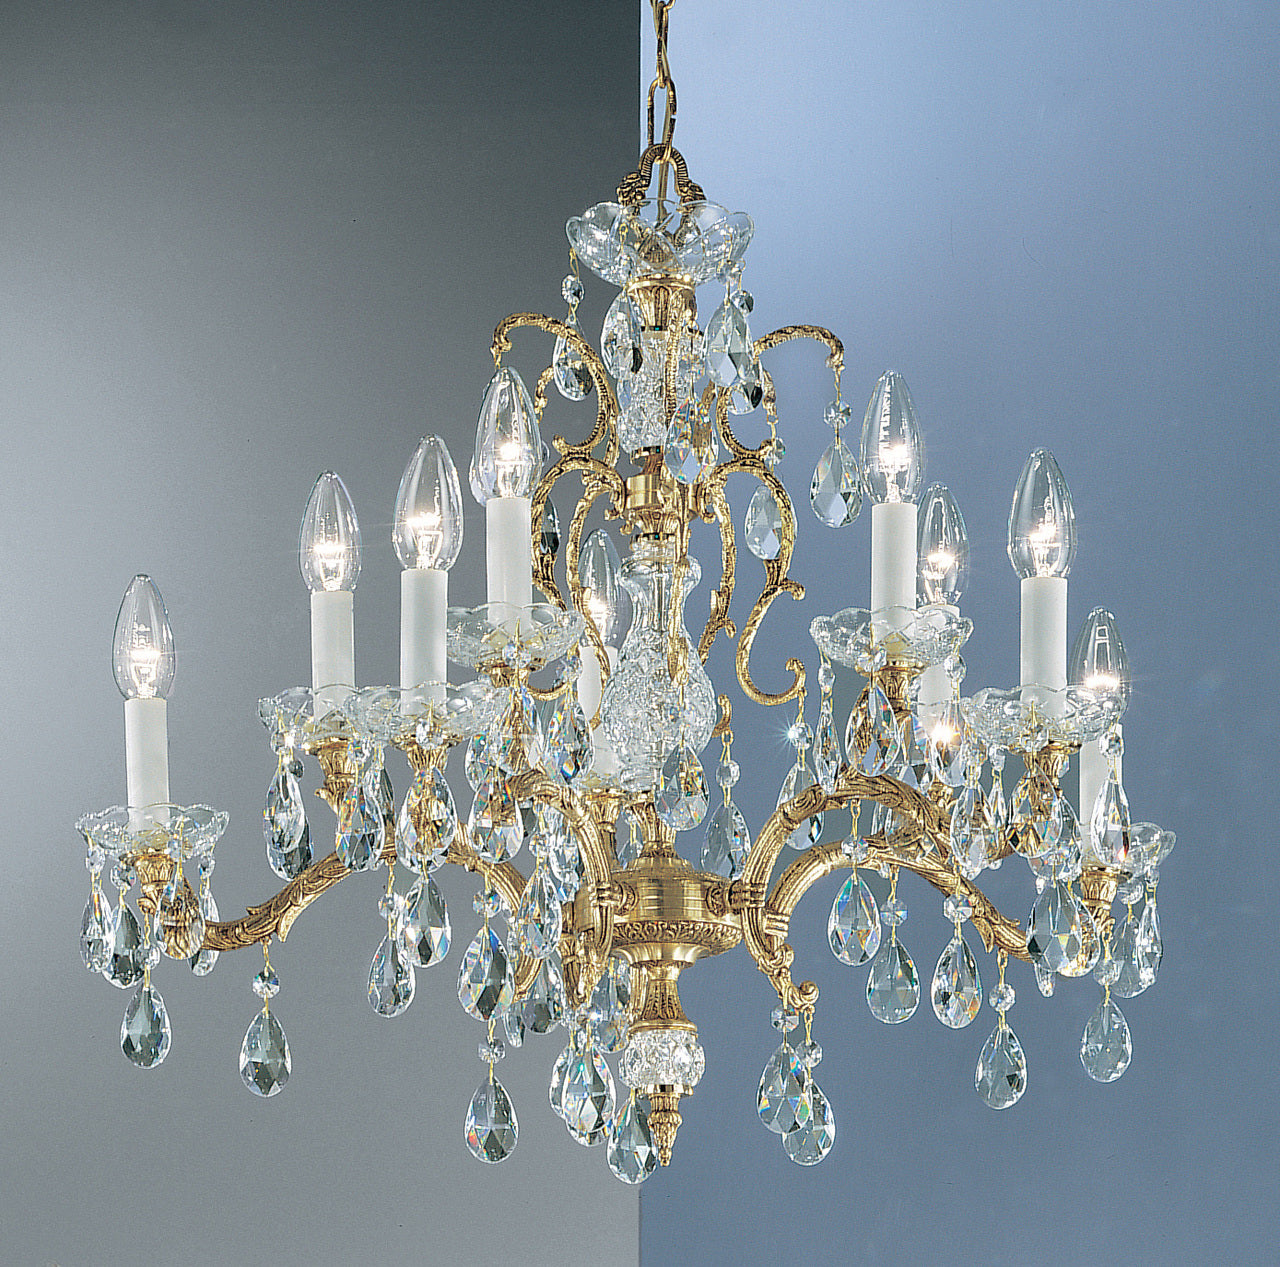 Classic Lighting 5530 OWB SGT Madrid Crystal/Cast Brass Chandelier in Olde World Bronze (Imported from Spain)